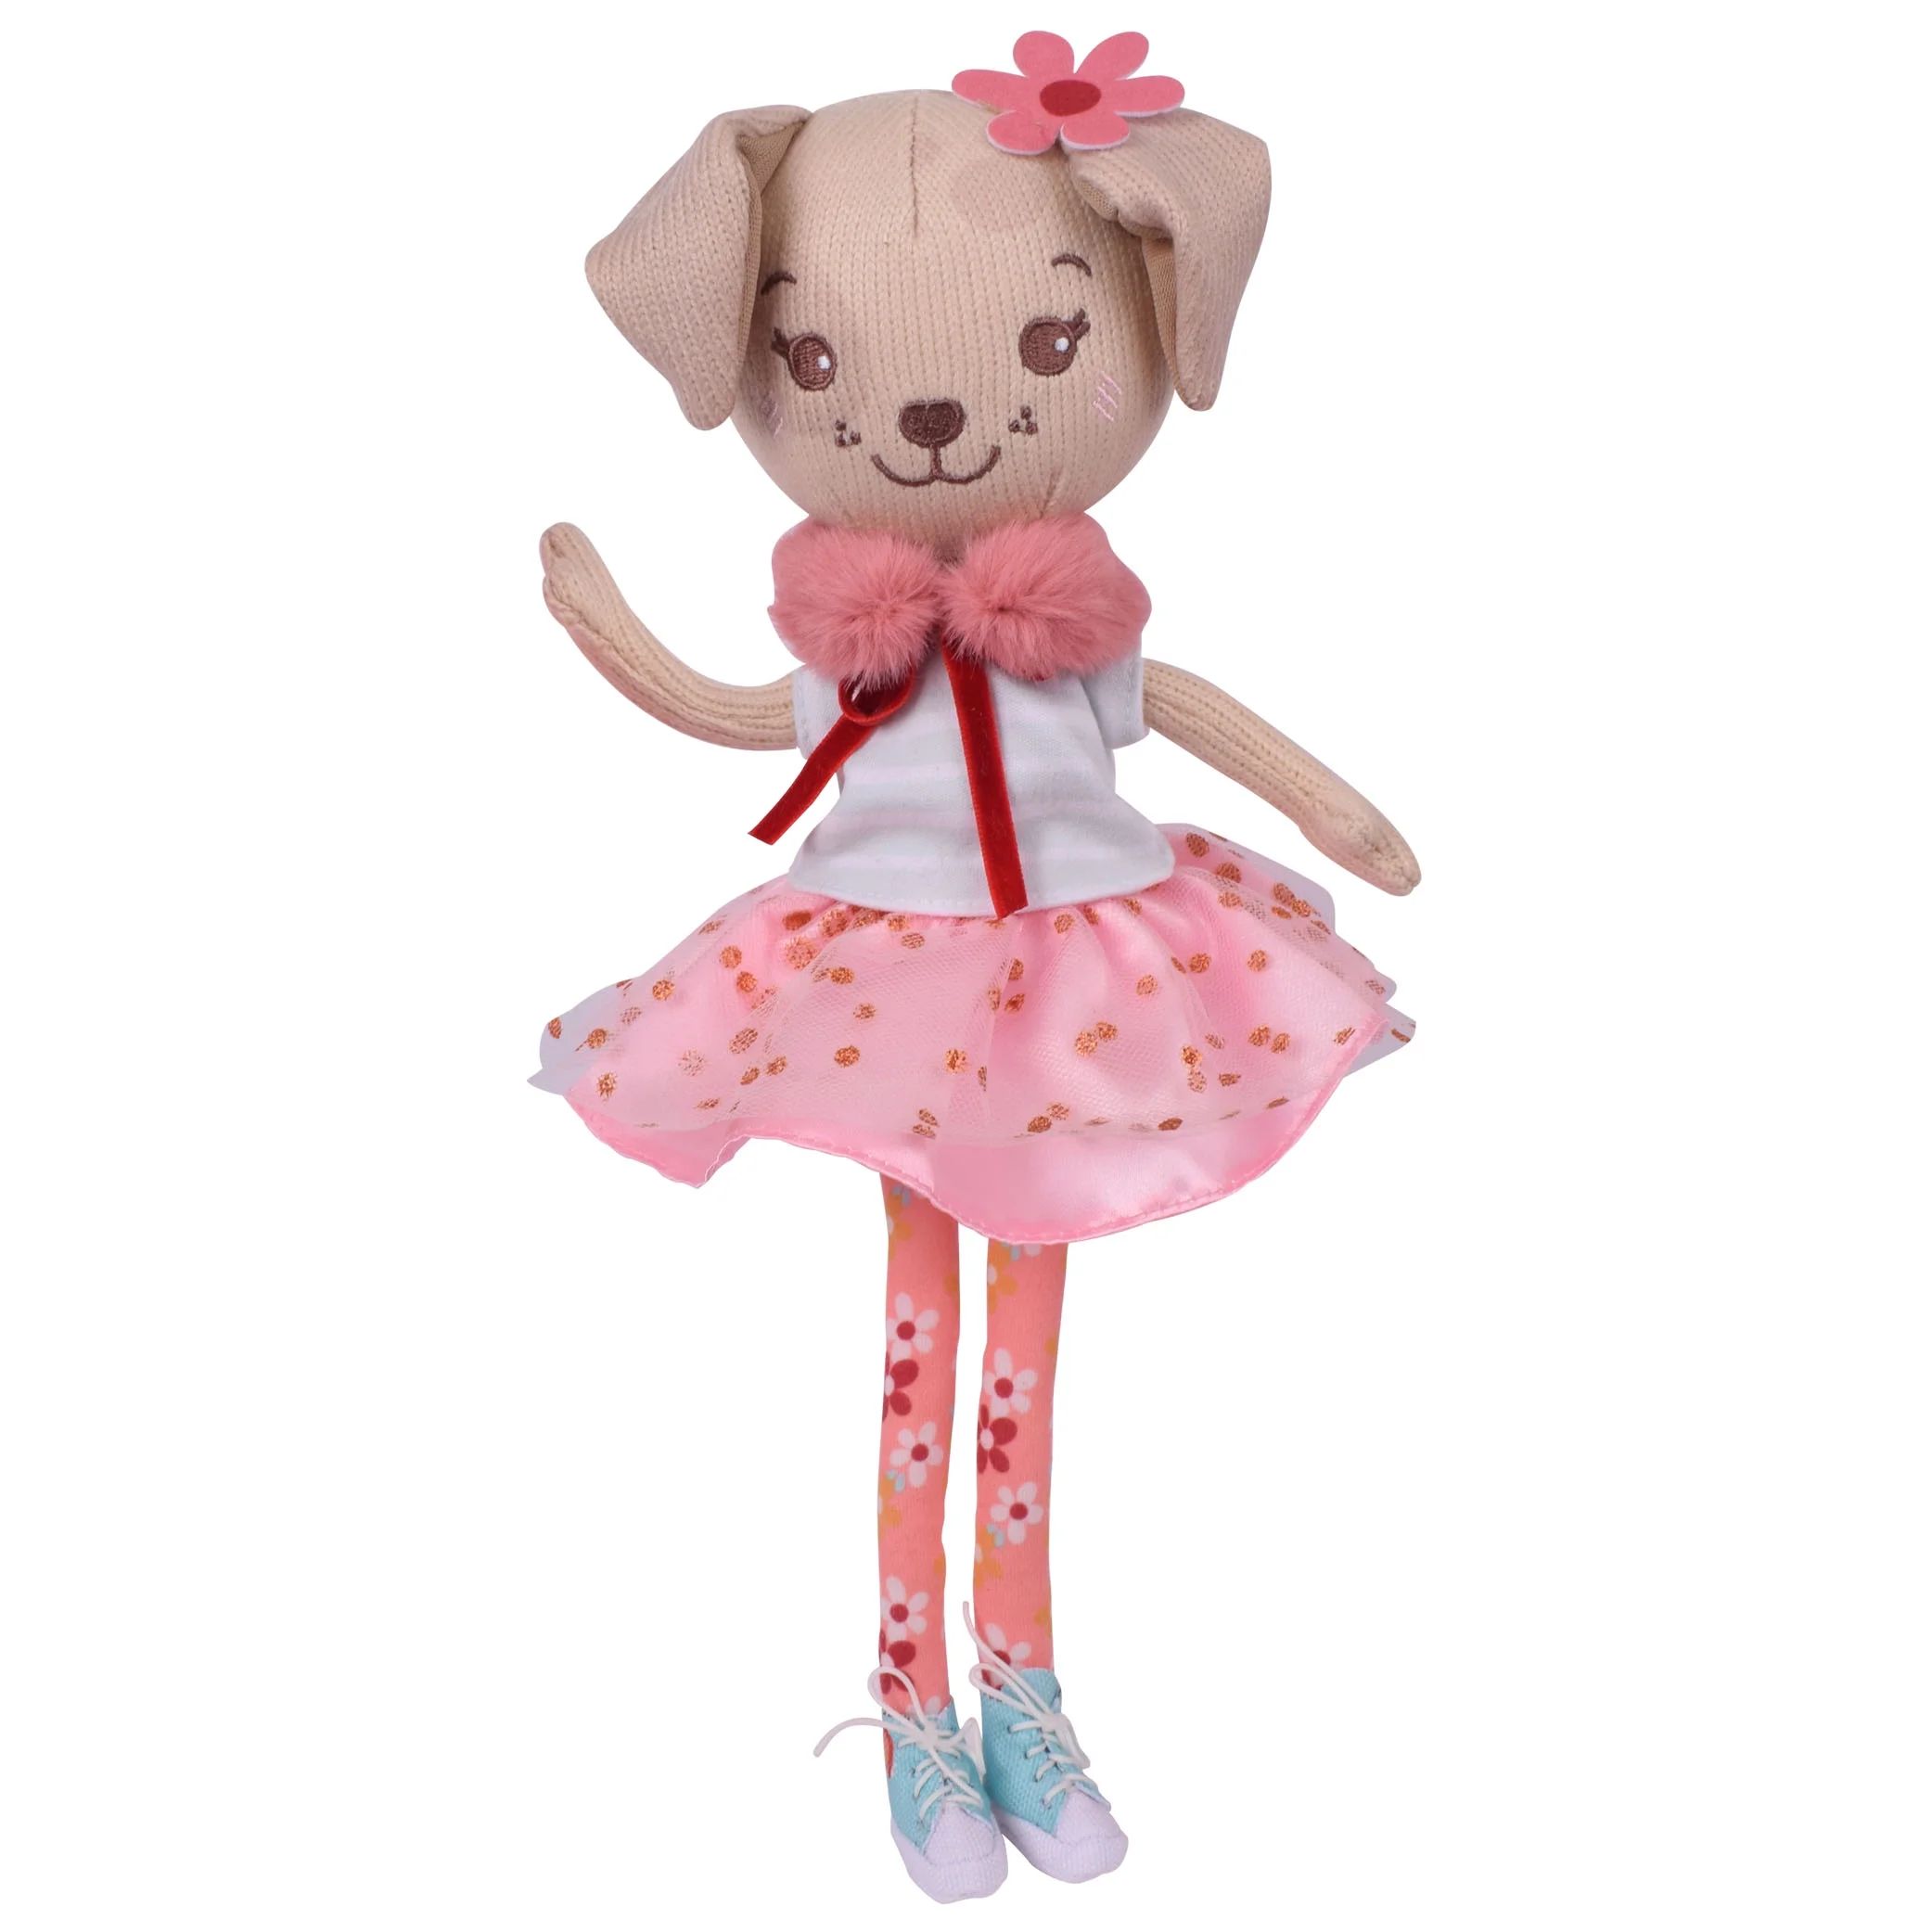 Hopscotch Lane Soft Bodied Doll, Rosy, Ages 0+ Months | Walmart (US)